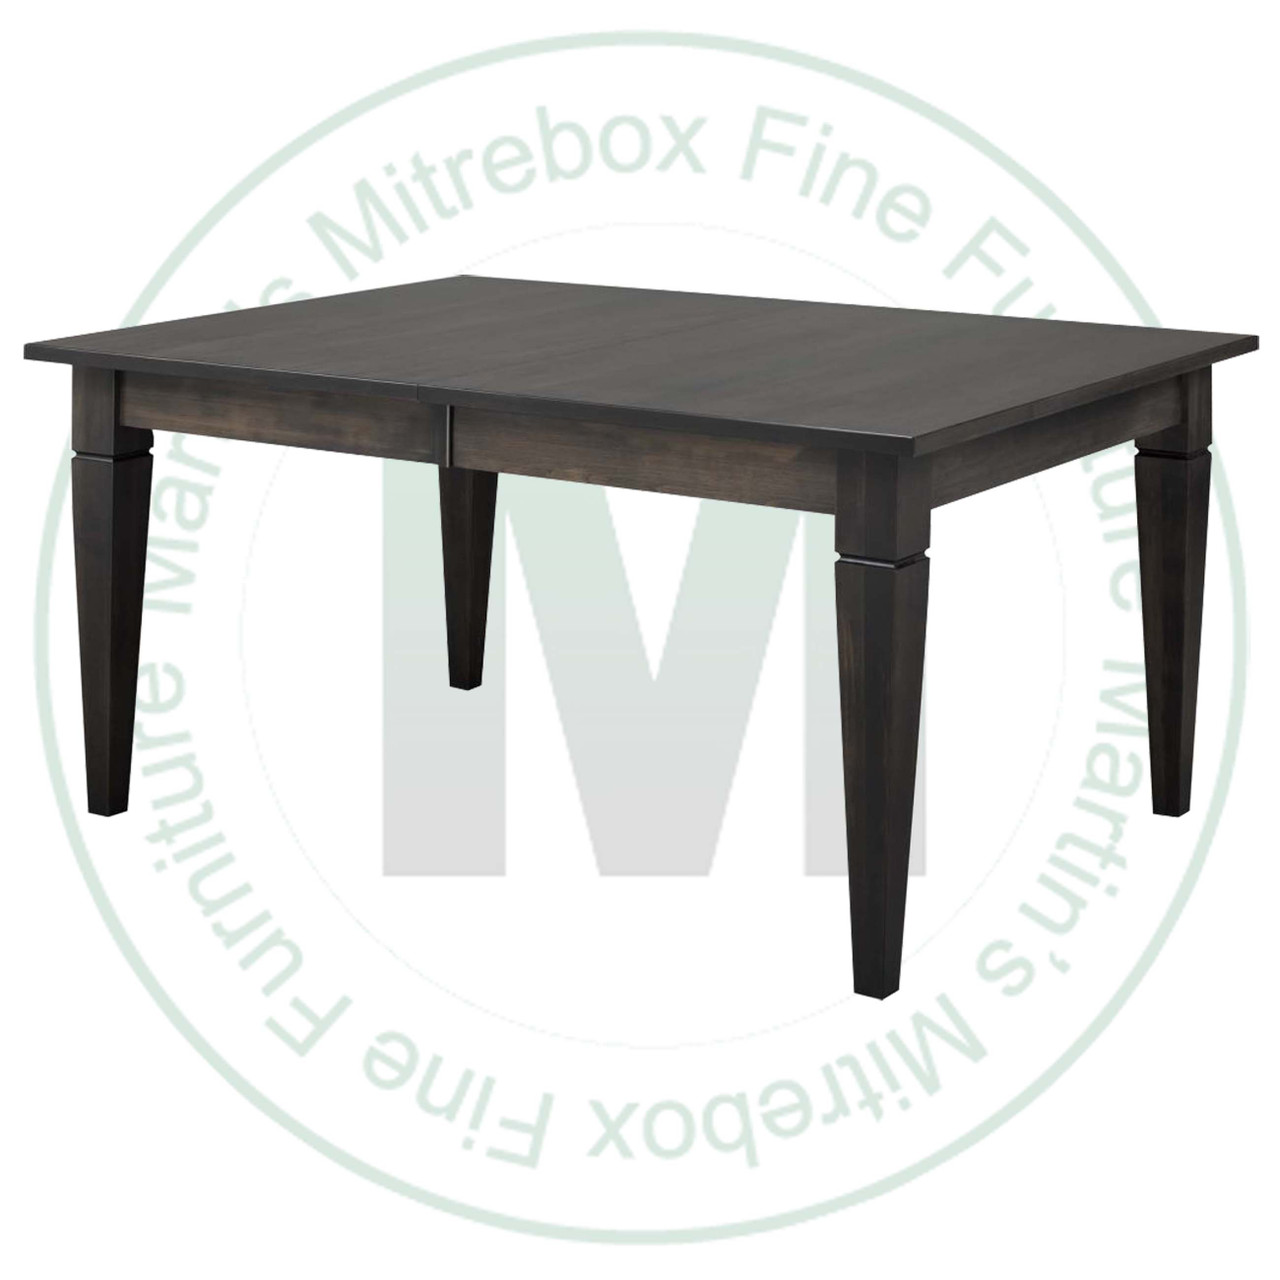 Wormy Maple Reesor Extension Harvest Table 60''D x 60''W x 30''H With 3 - 12'' Leaves Table Has 1 3/4'' Thick Top